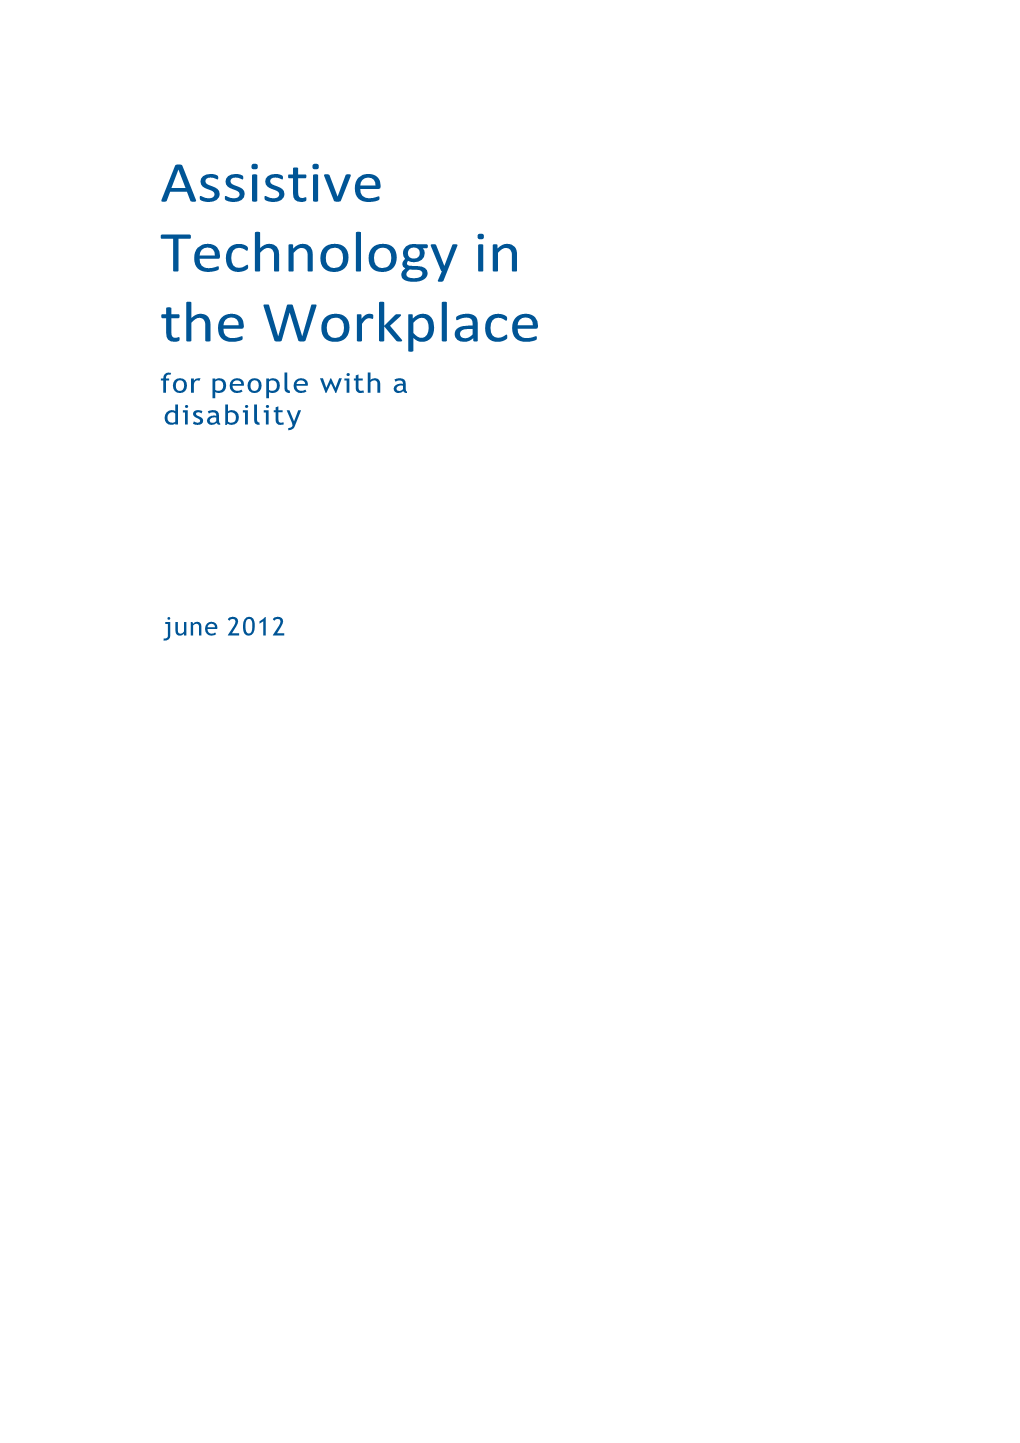 Assistive Technology in the Workplace